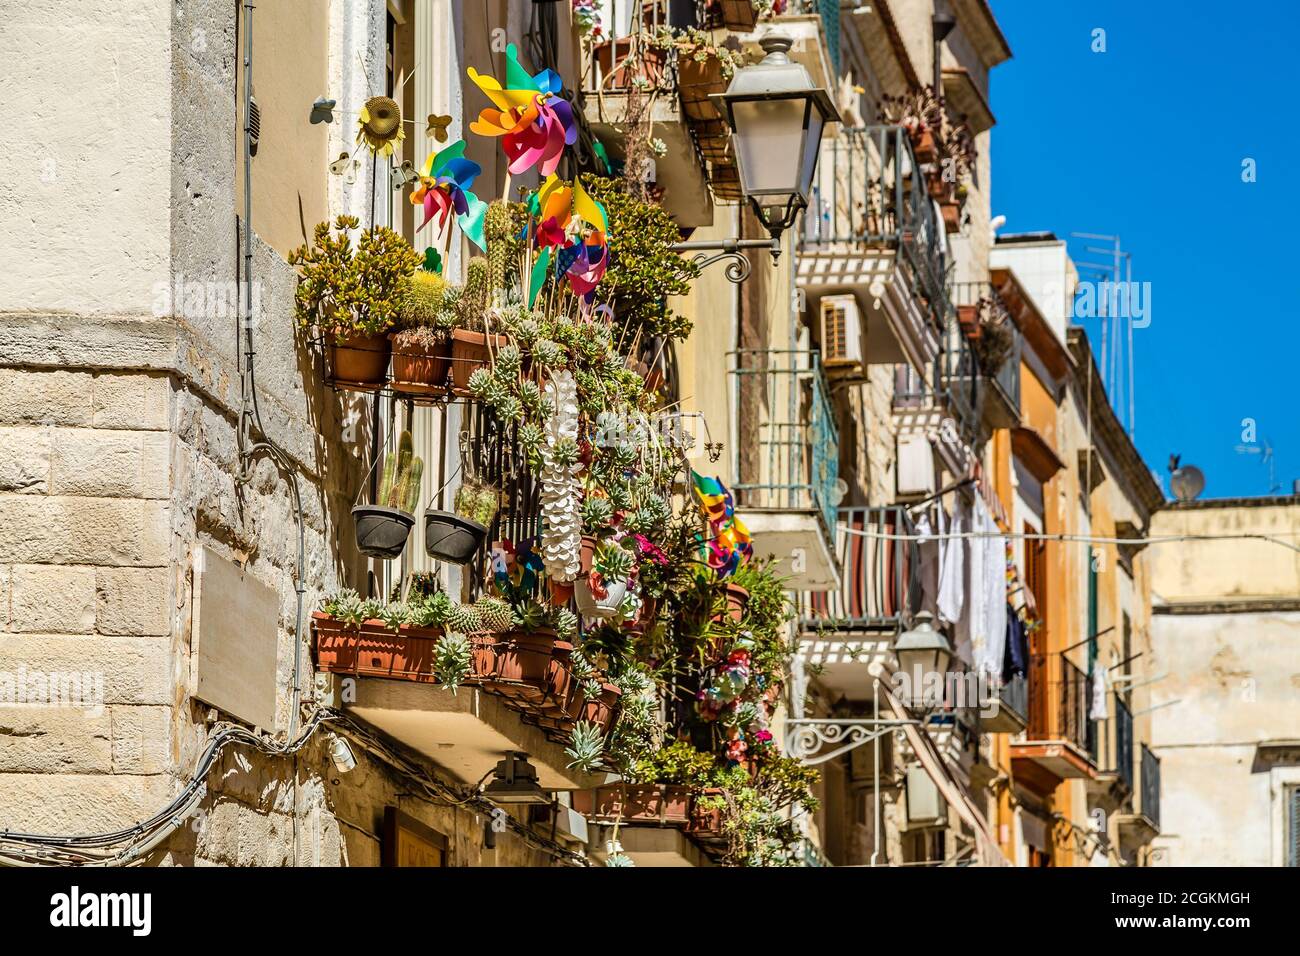 typical balconies of town in the Southern Italy Stock Photo